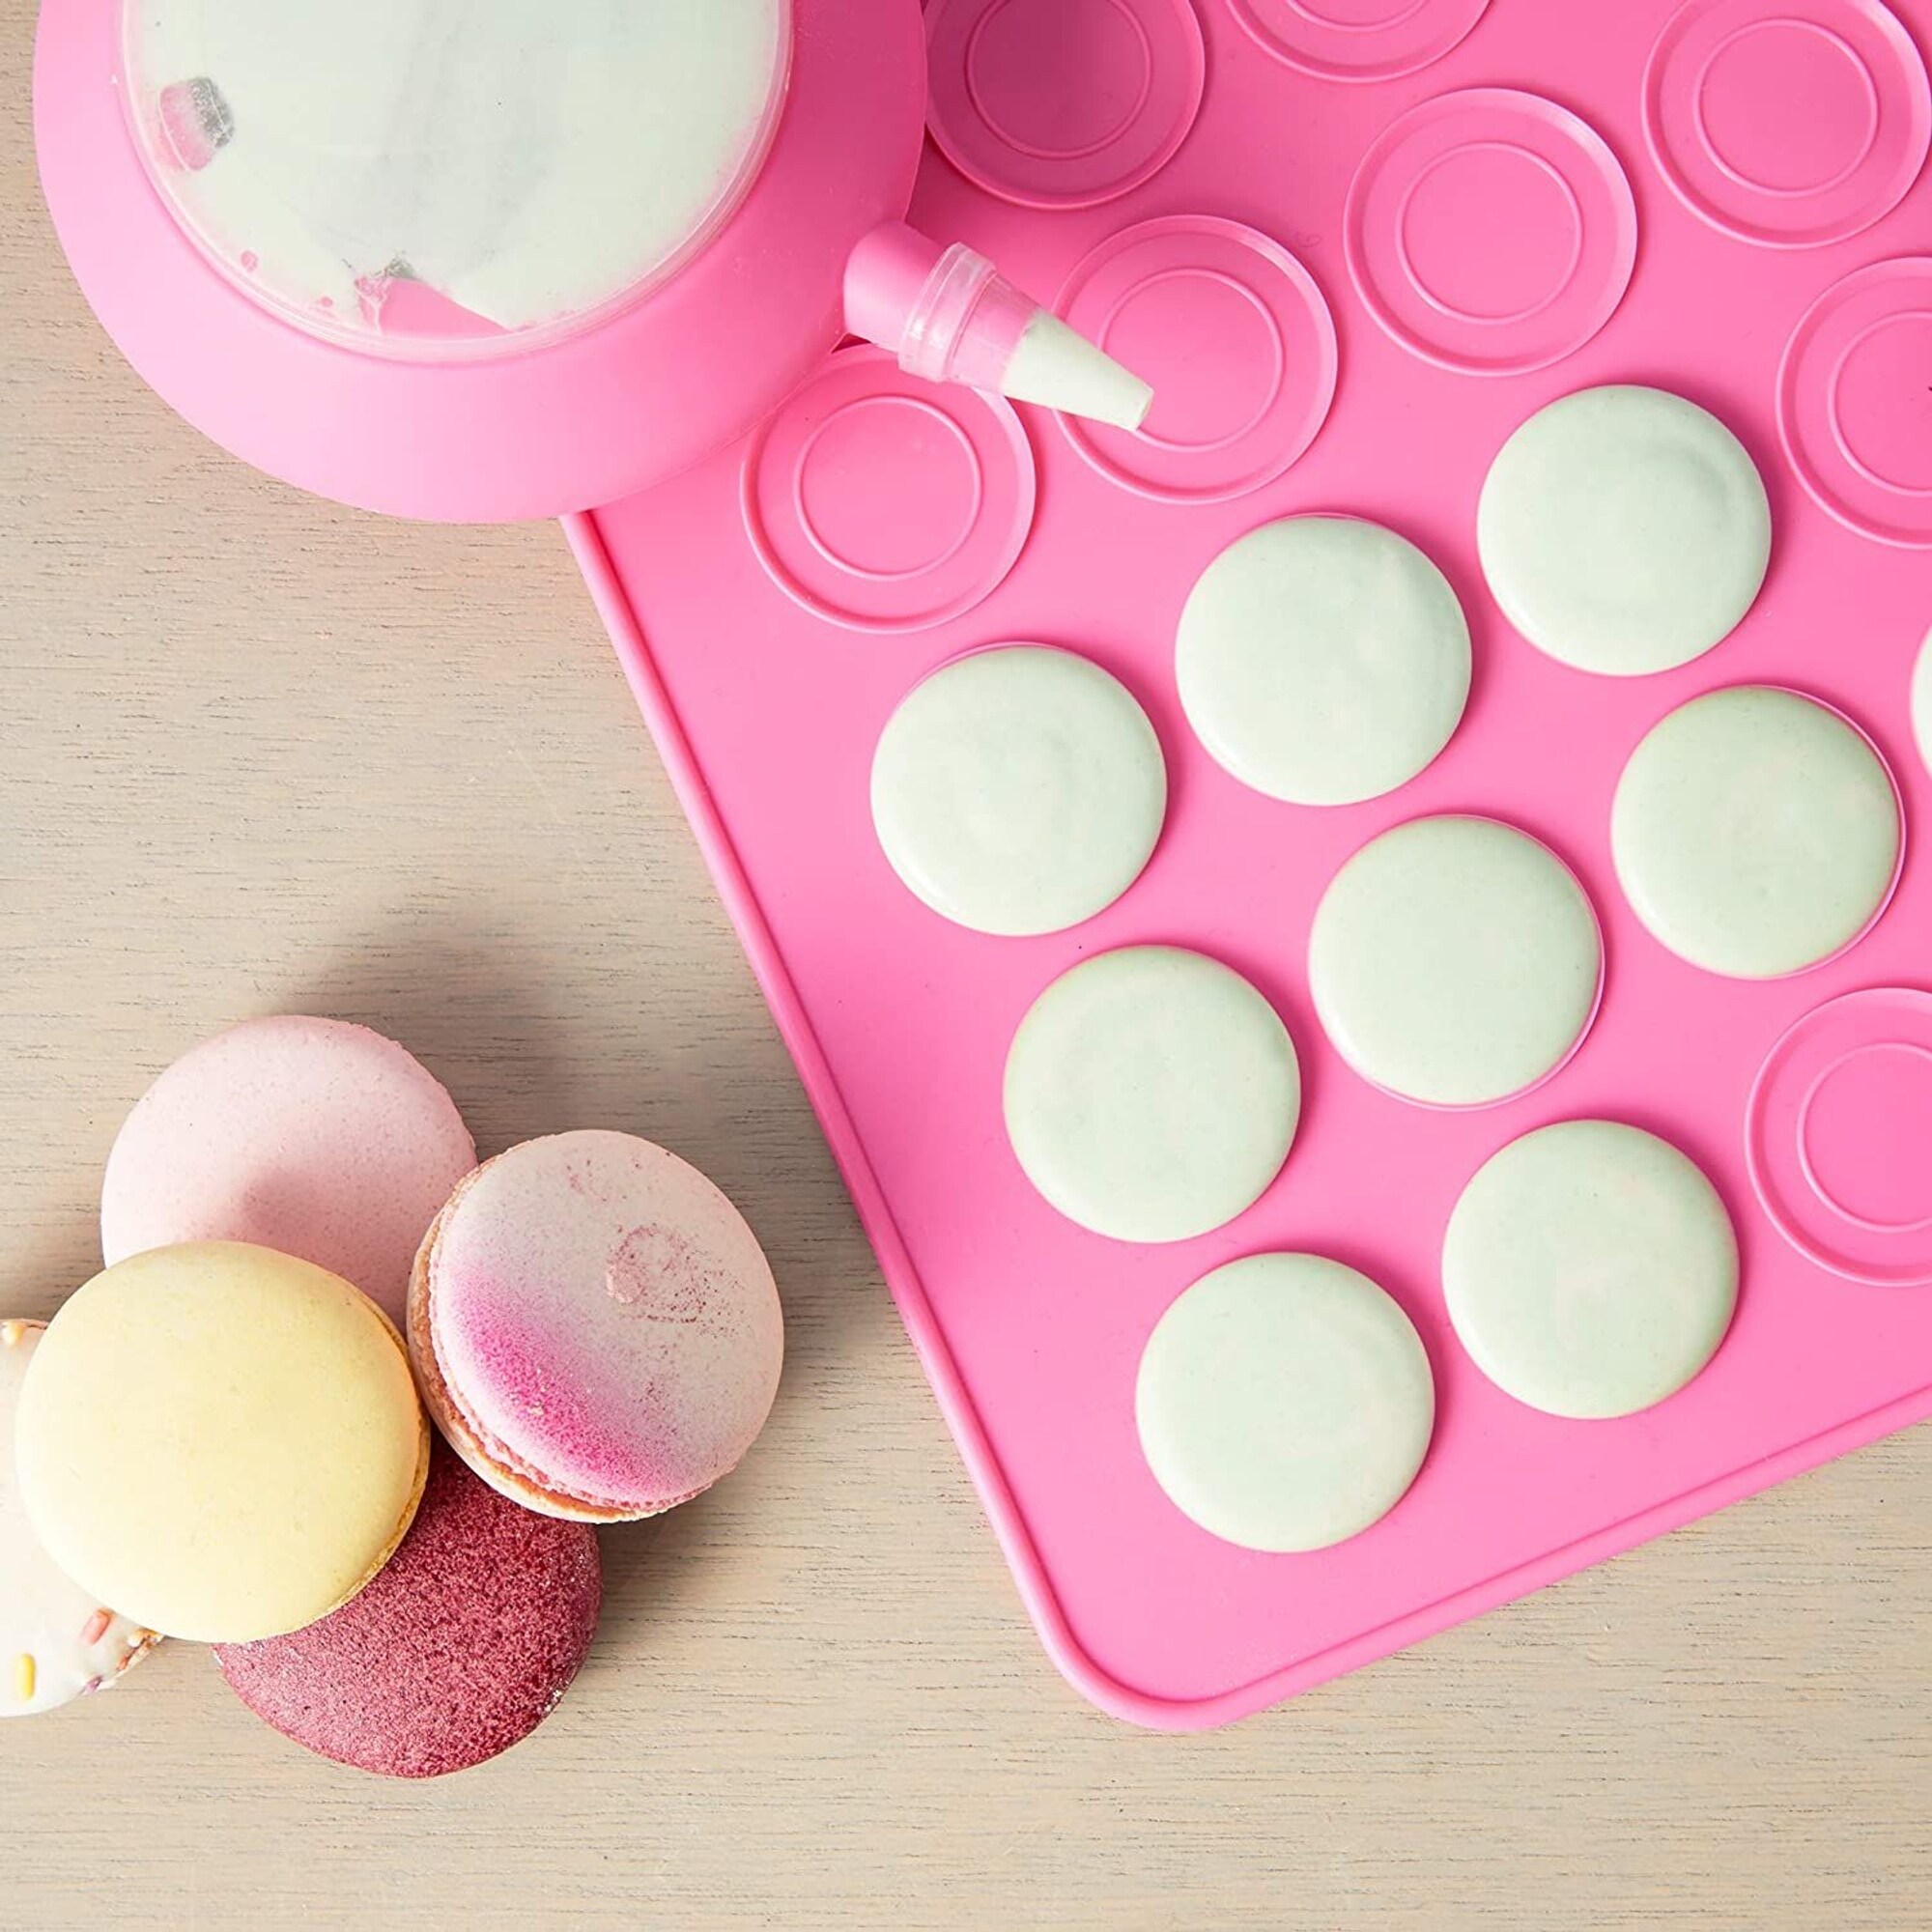 https://ak1.ostkcdn.com/images/products/is/images/direct/21322a79b619dc1aeb751cd8875b68de8181dab8/Macaron-Baking-Kit-with-Pink-Silicone-Mat-Cookie-Sheet%2C-Piping-Pot%2C-5-Nozzle-Tips-%287-Piece-Set%29.jpg